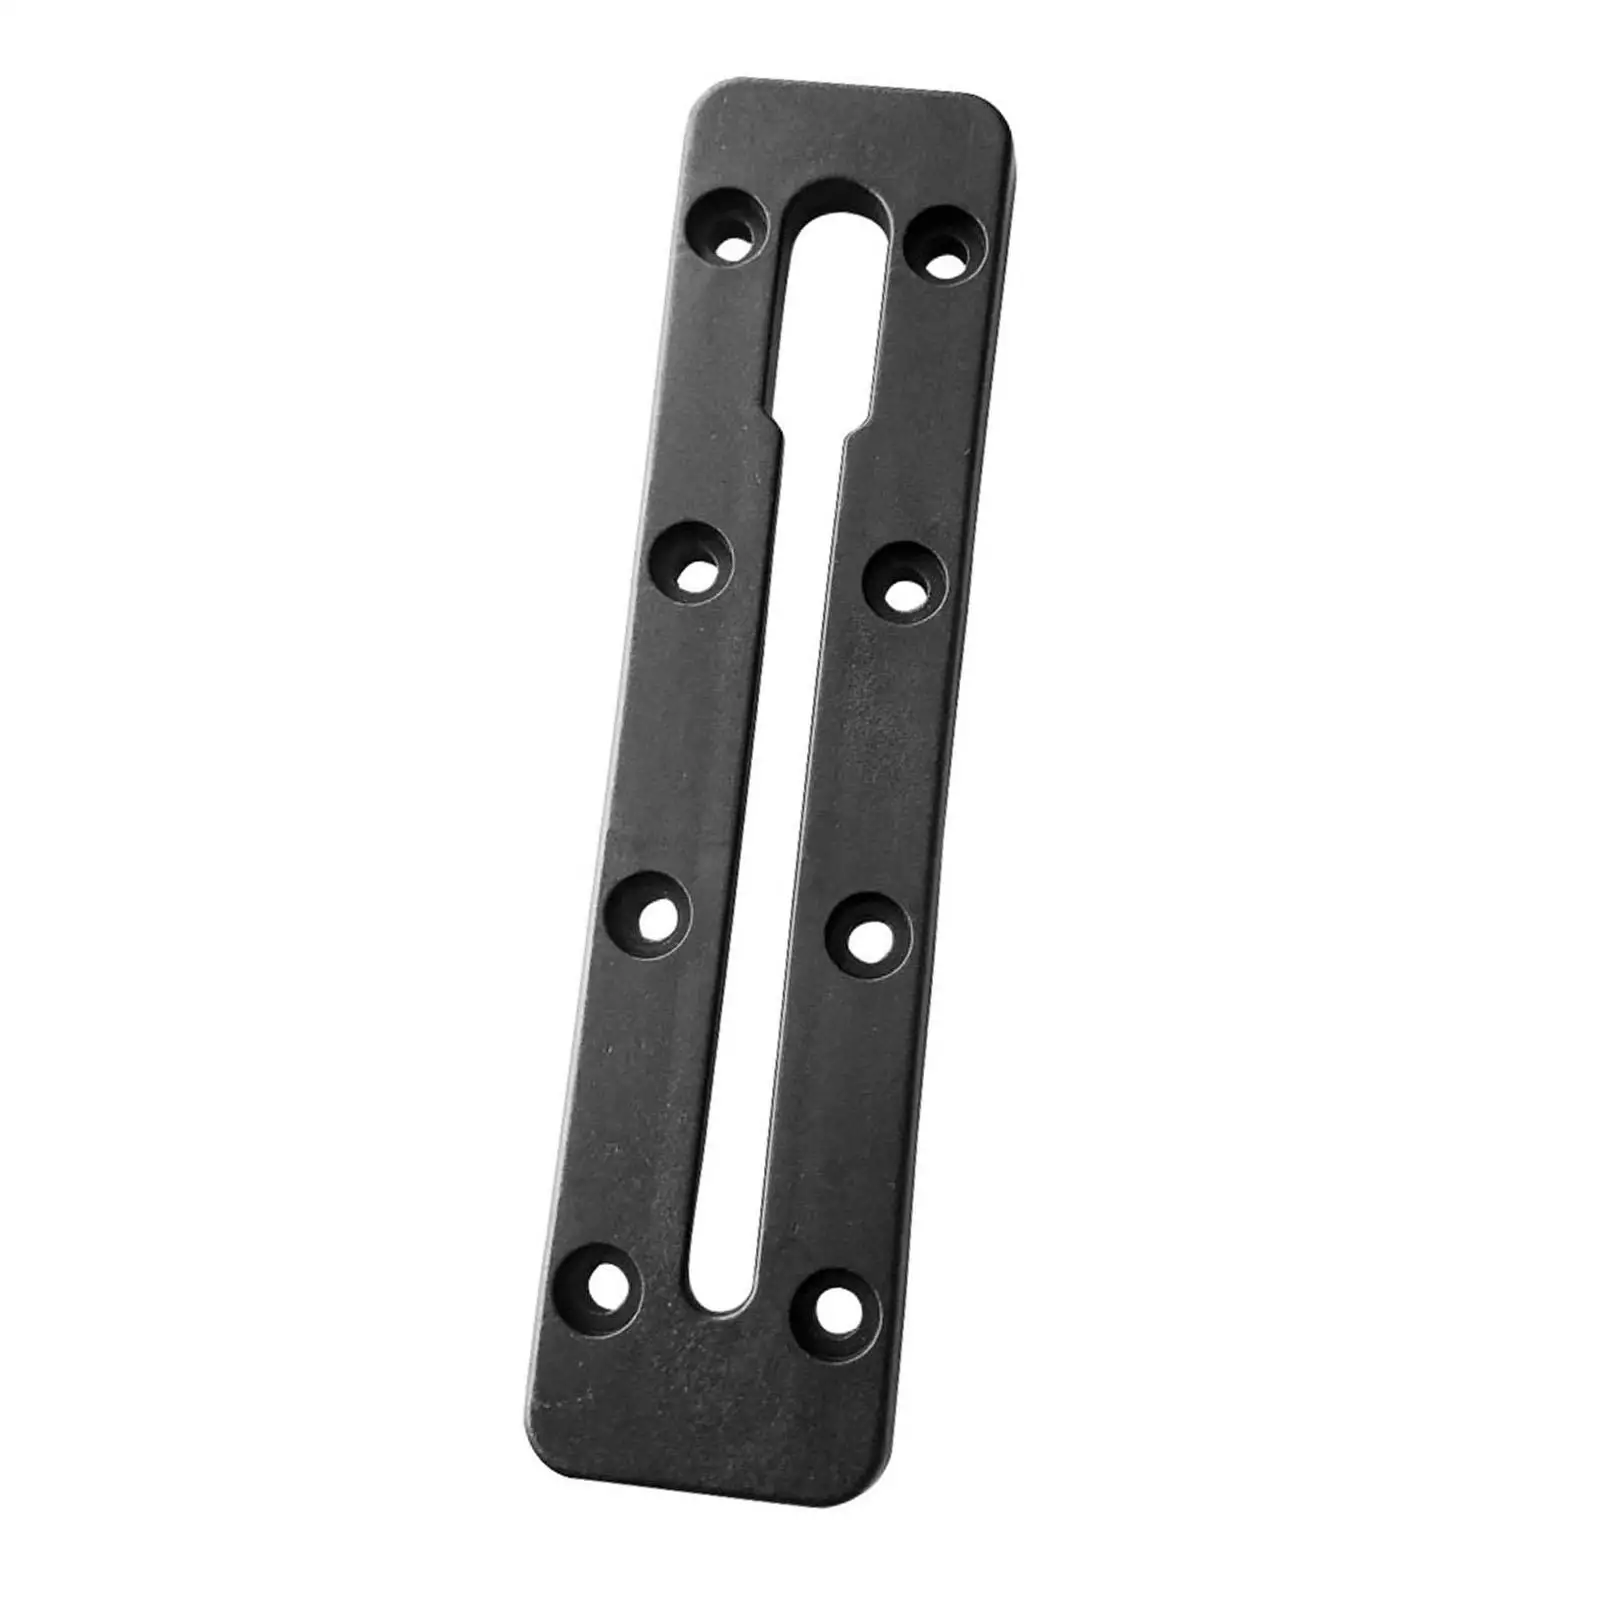 Kayak Slide Track Replaces Accessory Durable DIY Accessories Mounting Base Rack